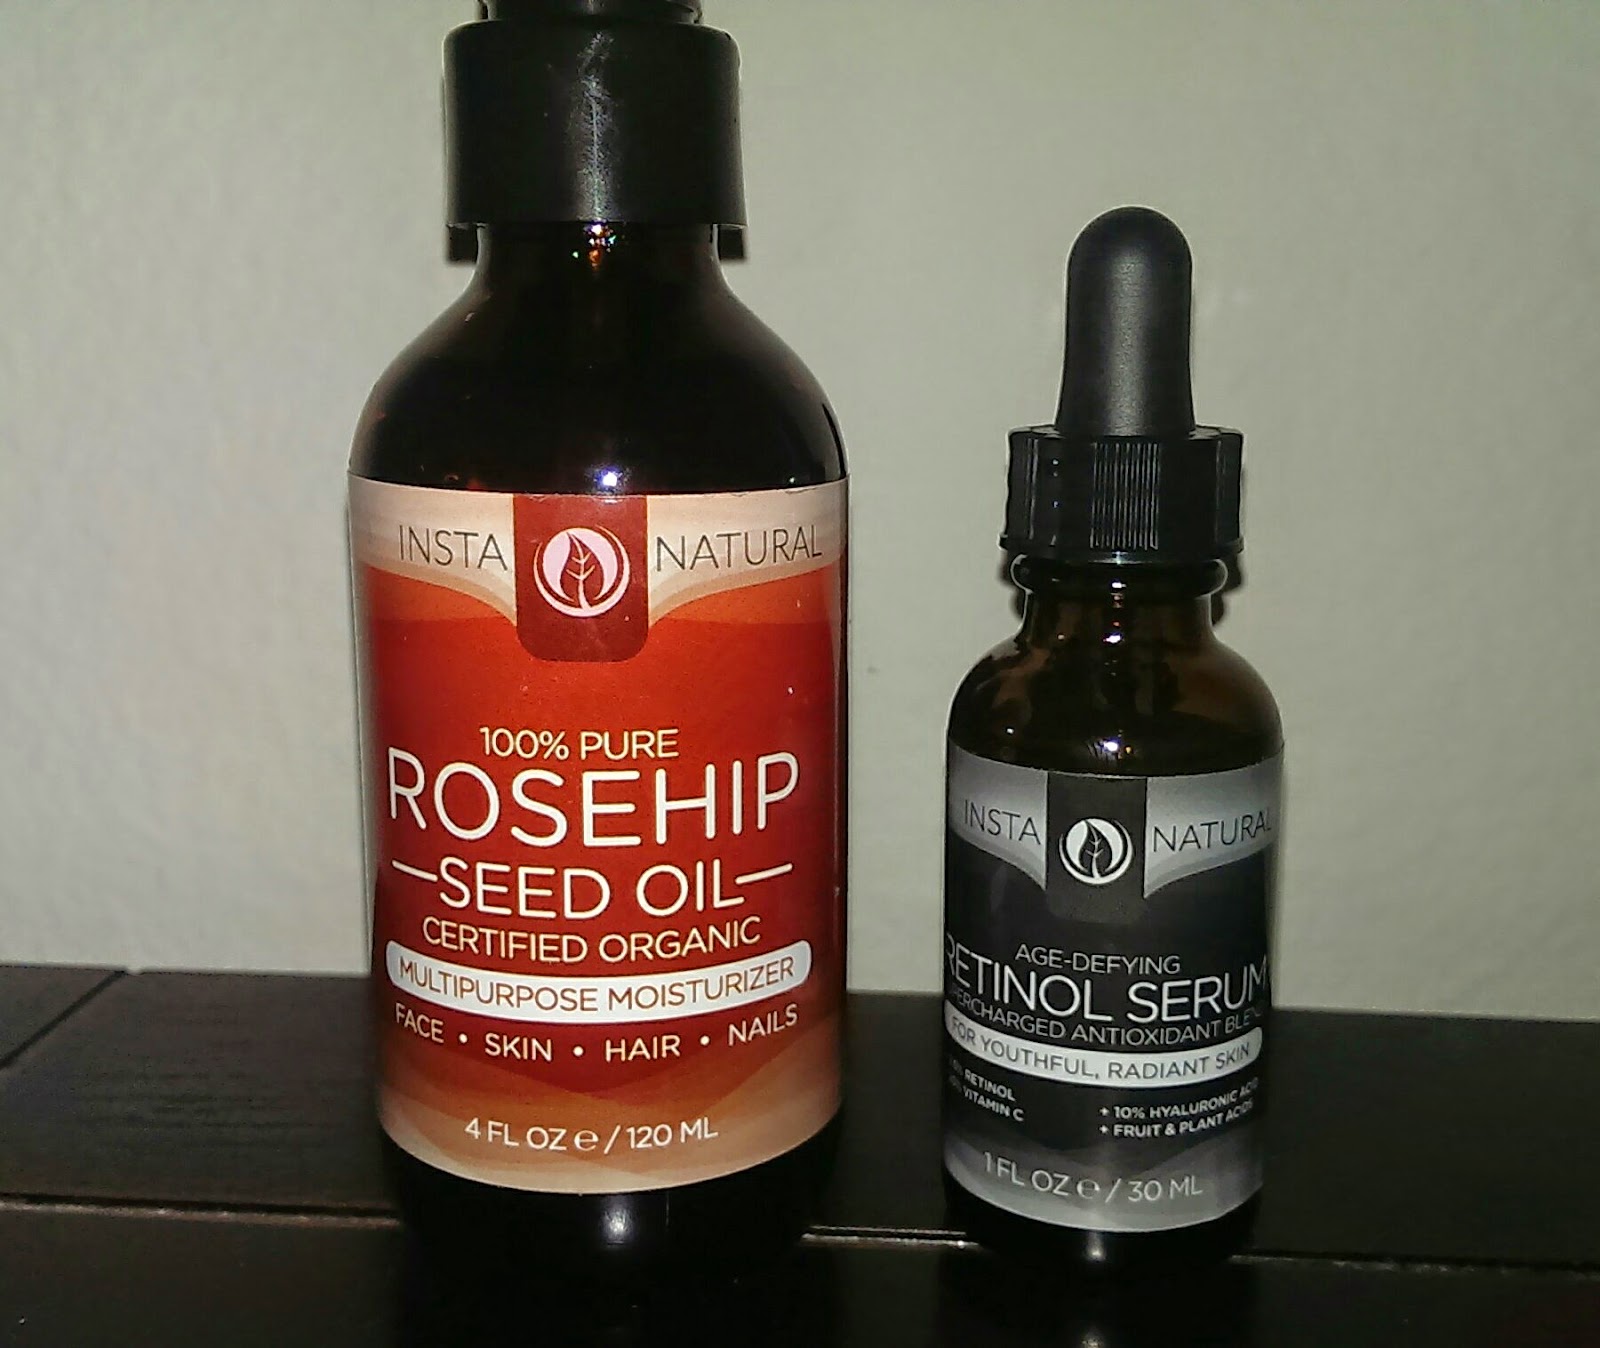 Rosehip%2BSeed%2BOil InstaNatural Rosehip Seed Oil and Retinol Serum Review